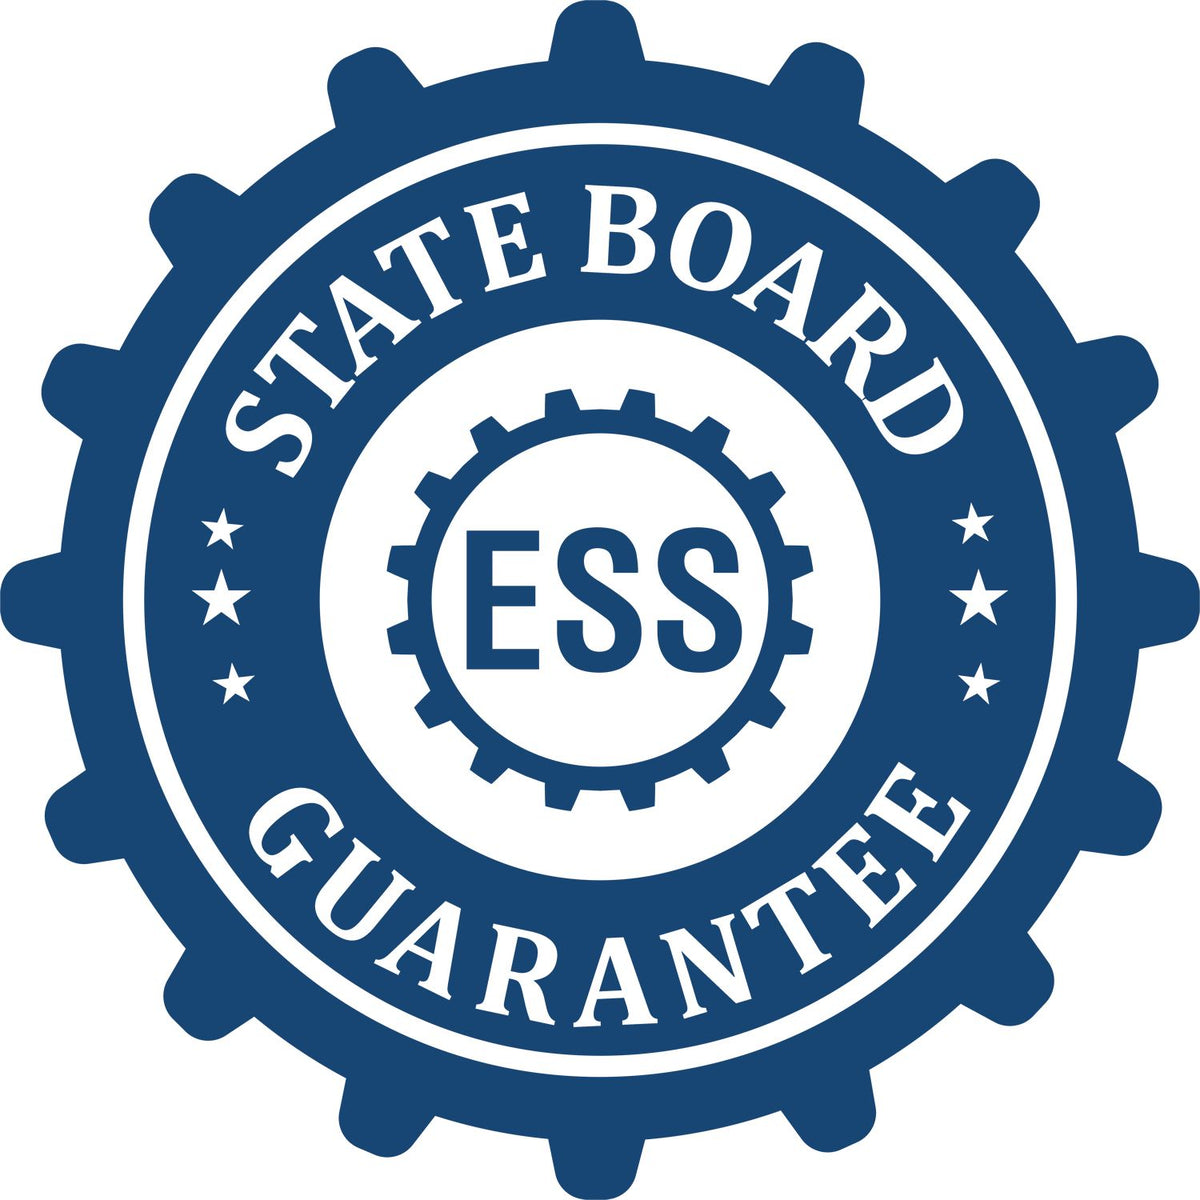 An emblem in a gear shape illustrating a state board guarantee for the Hybrid Kansas Engineer Seal